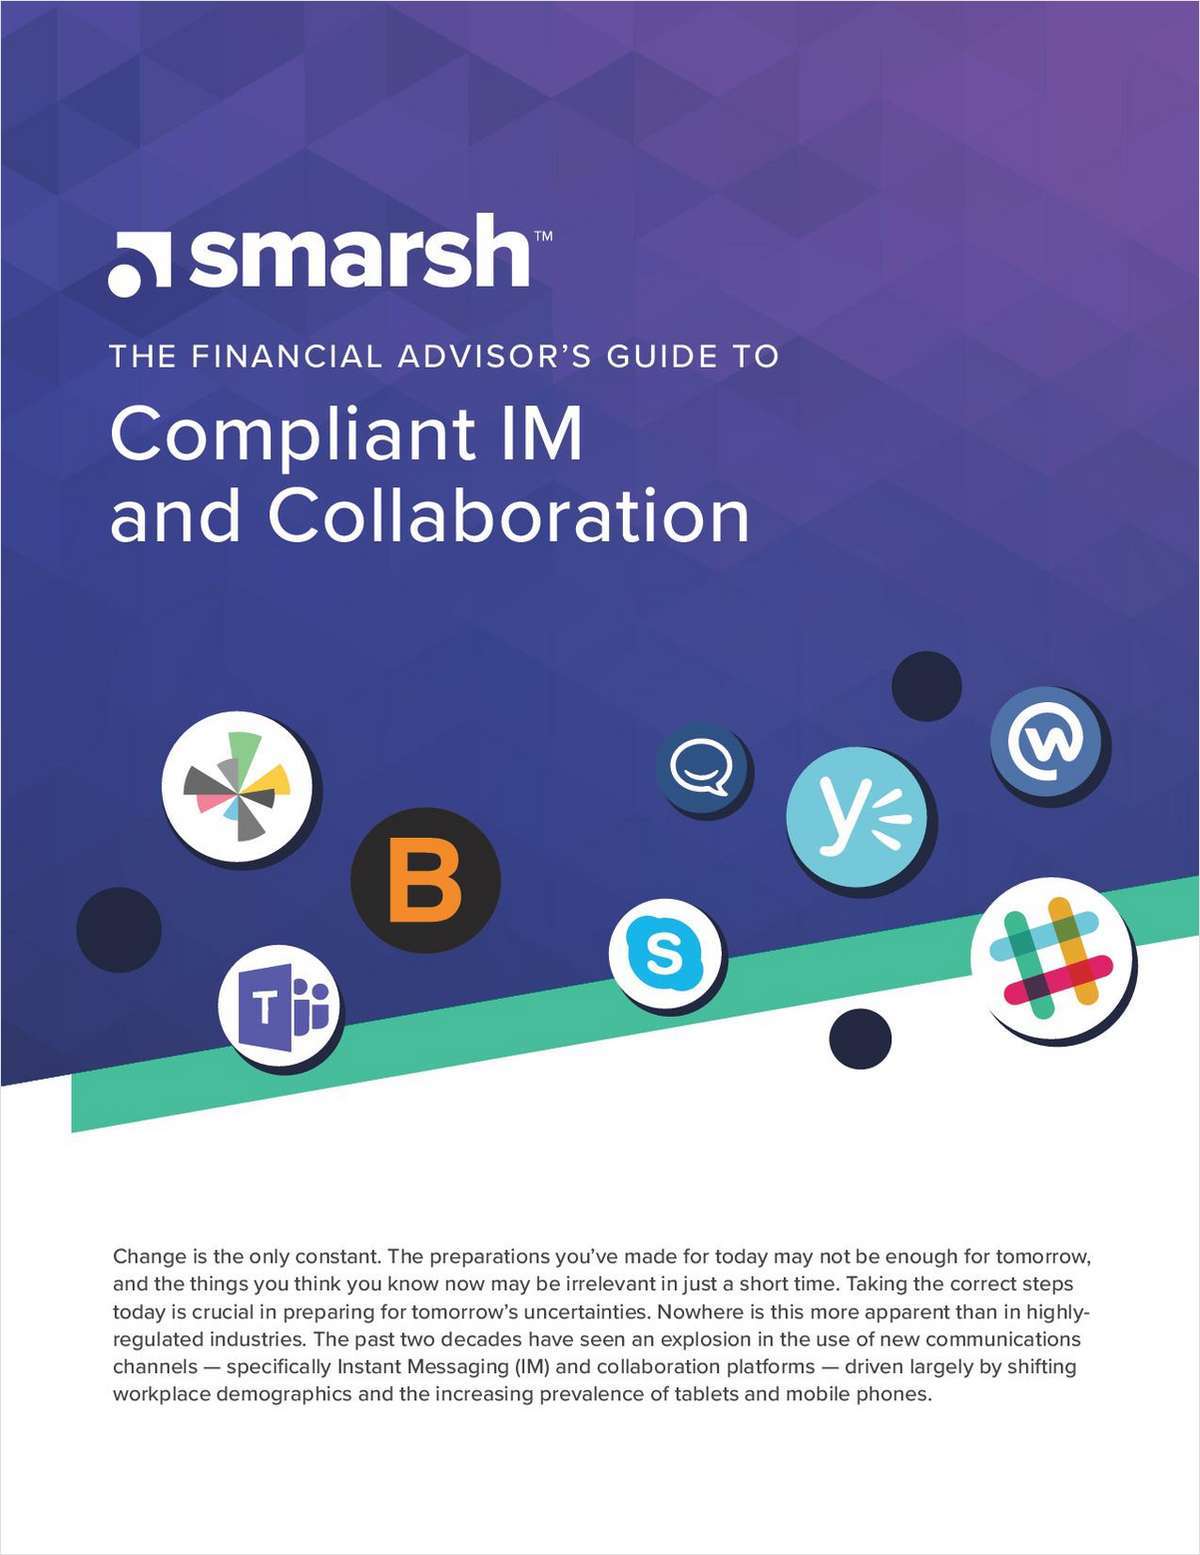 The Financial Advisor's Guide to Compliant IM and Collaboration